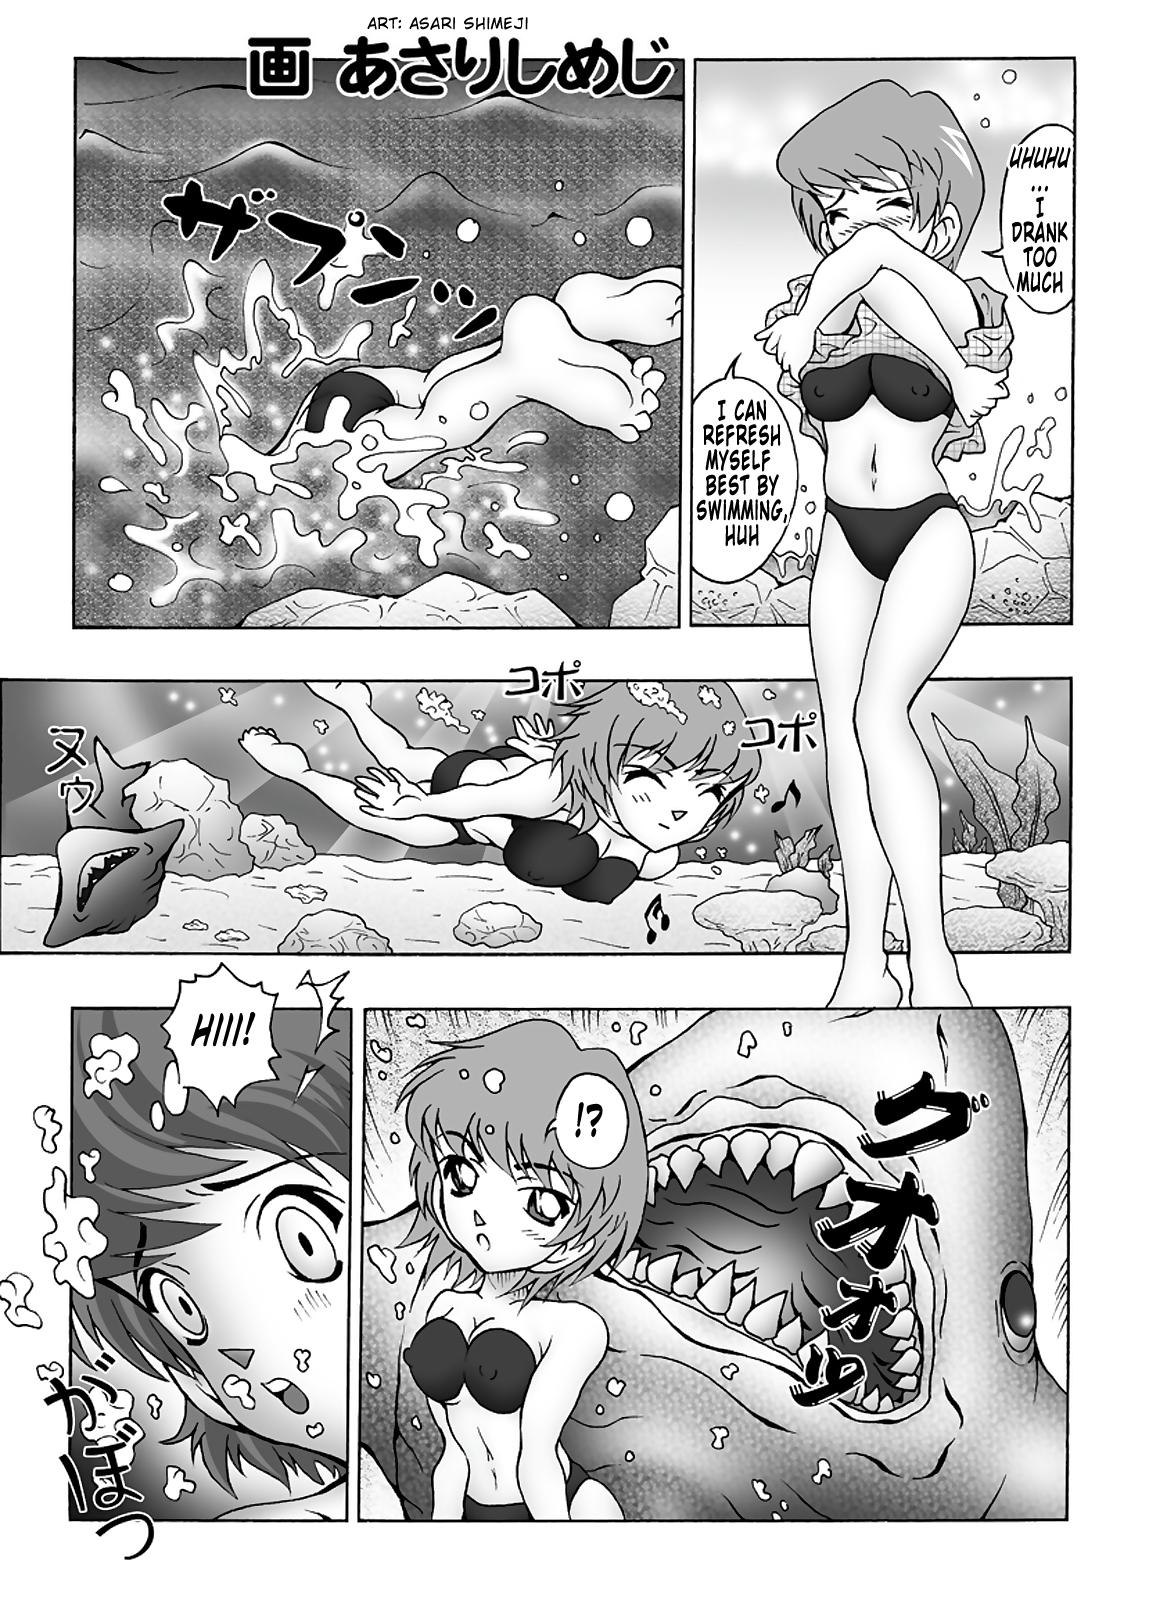 Venezuela Bumbling Detective Conan - File 9: The Mystery Of The Jaws Crime - Detective conan Olderwoman - Page 4